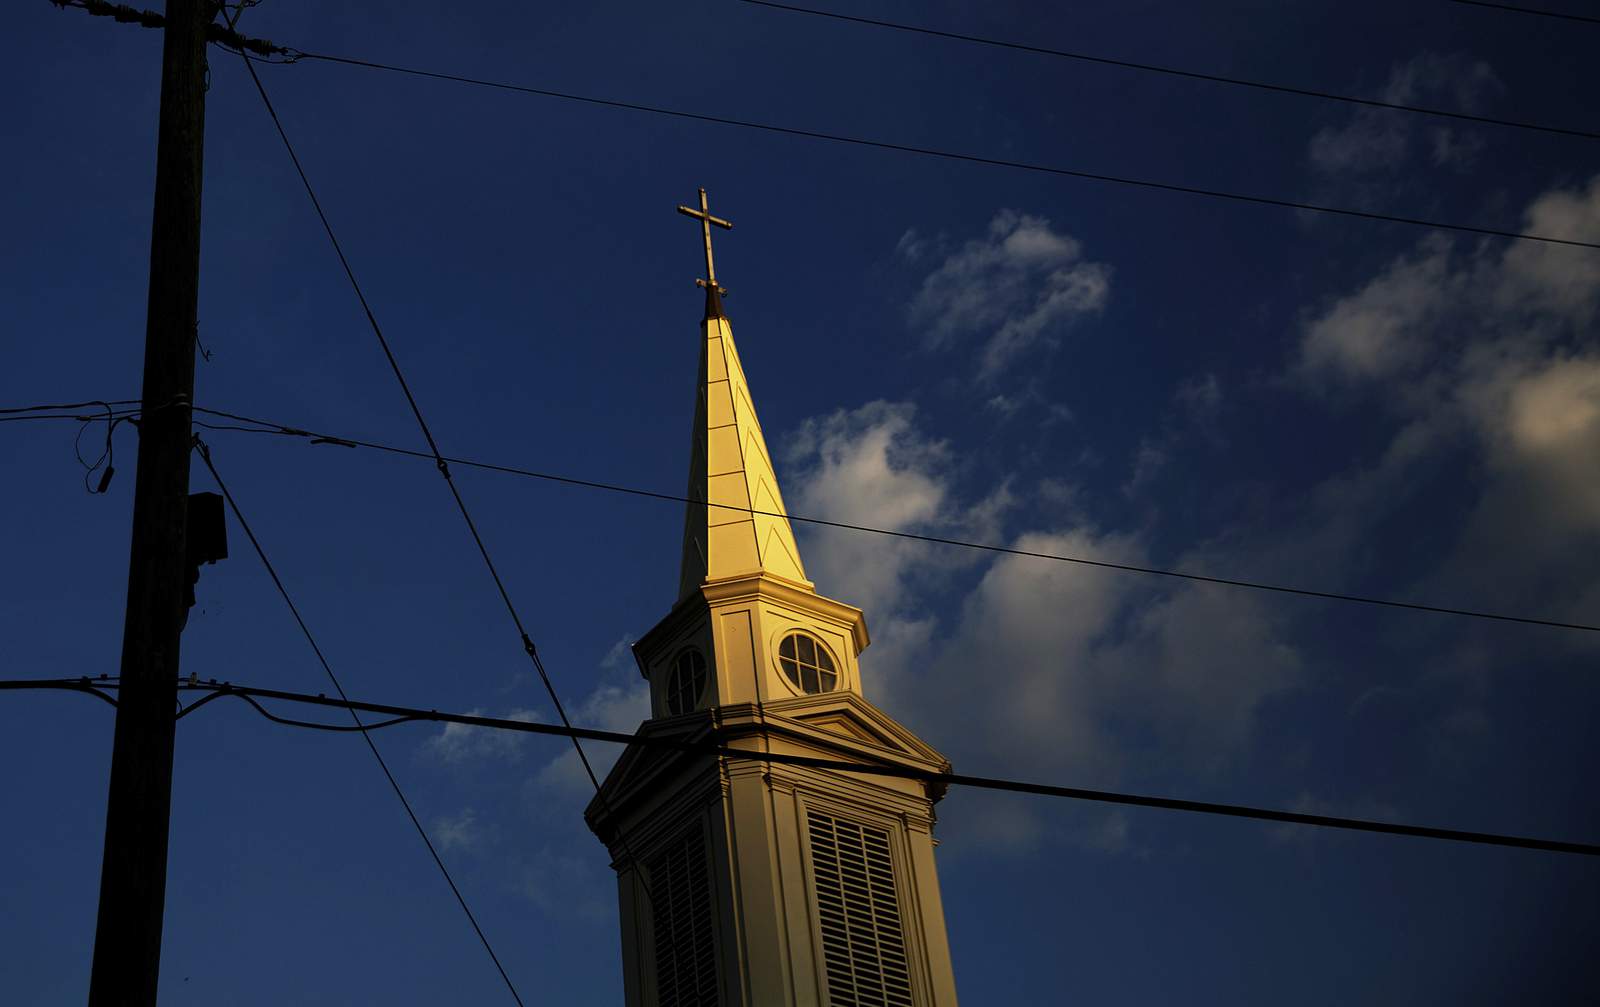 Less than half of Americans are members of houses of worship